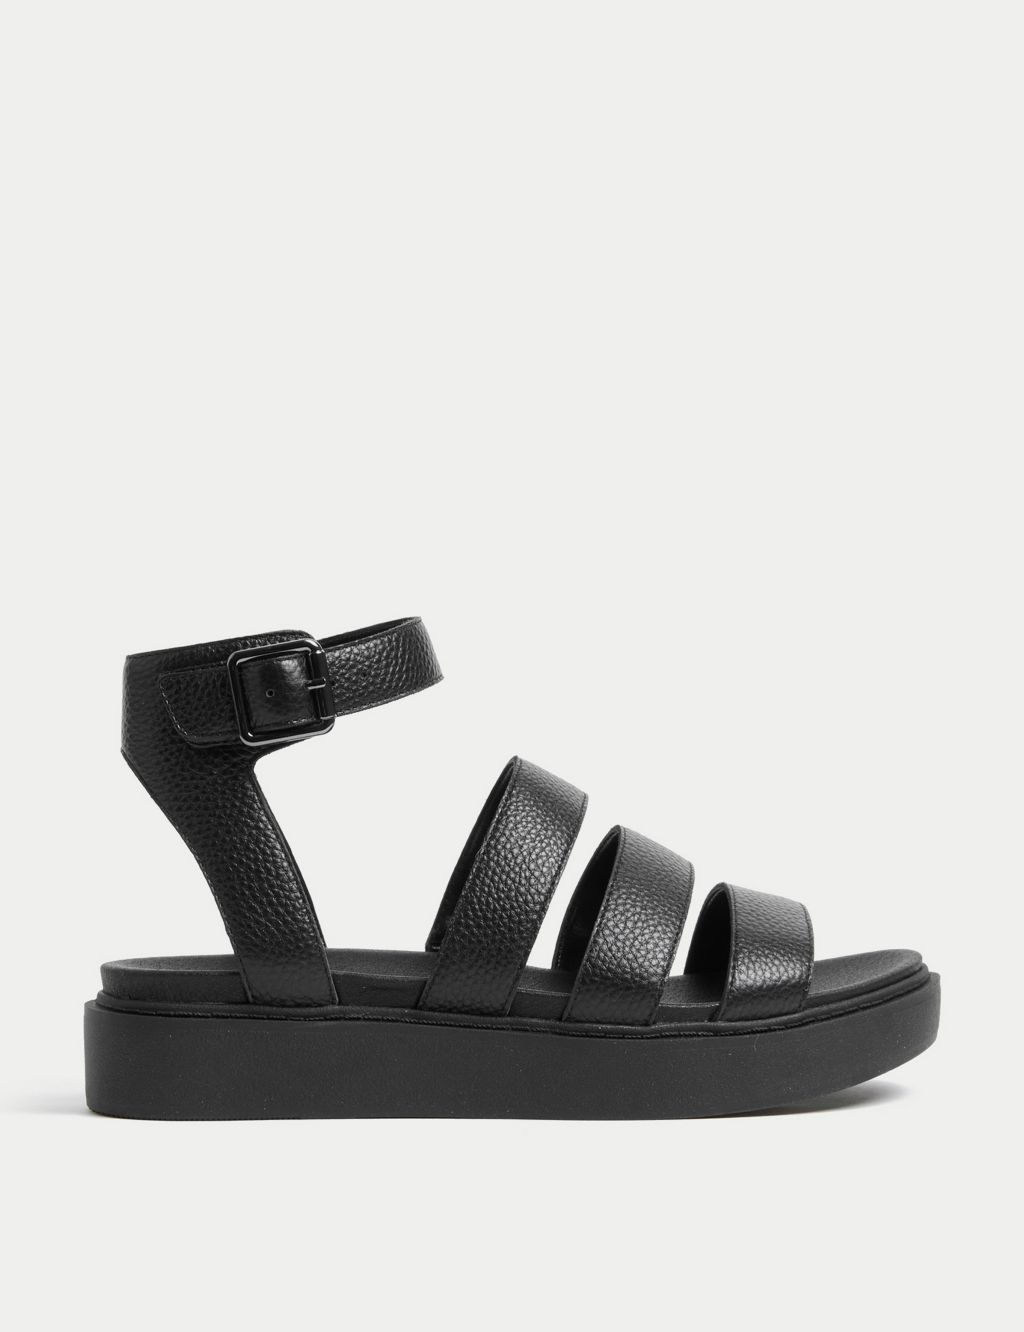 Leather Ankle Strap Flat Sandals Mid image 1